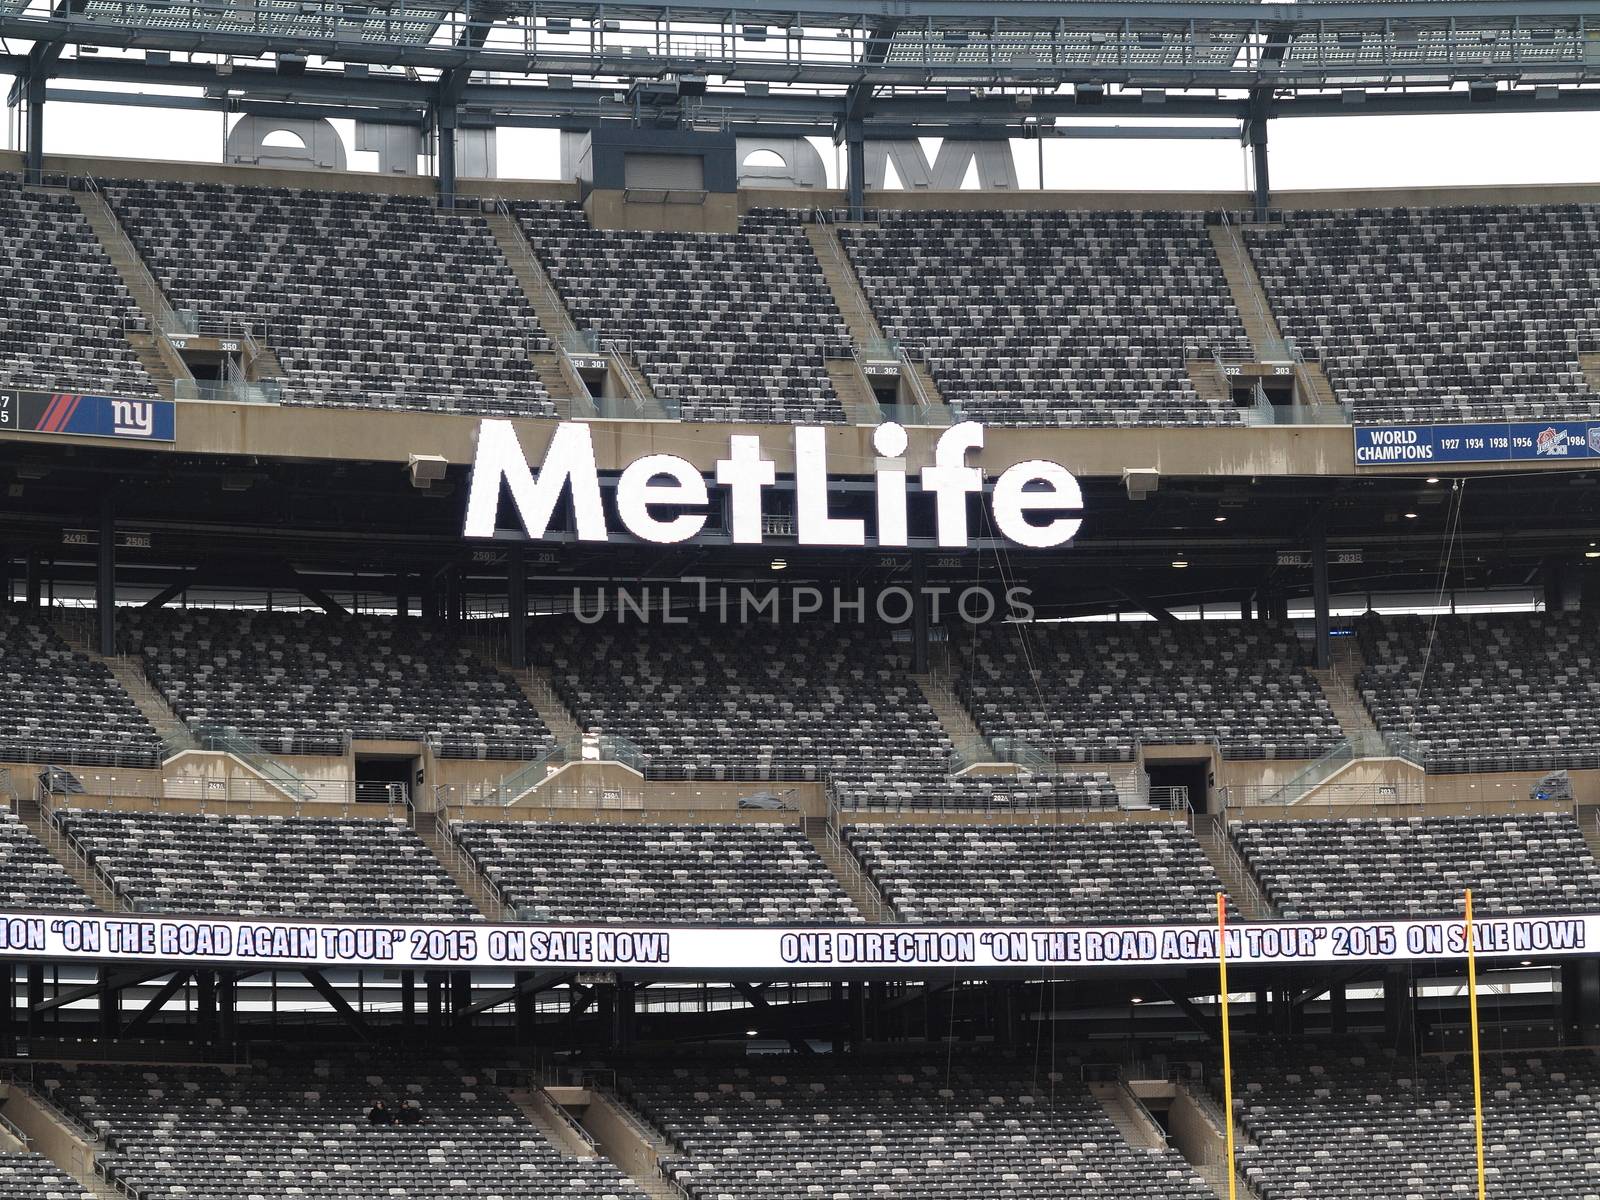 New York Jets Giants - MetLife Stadium by Ffooter